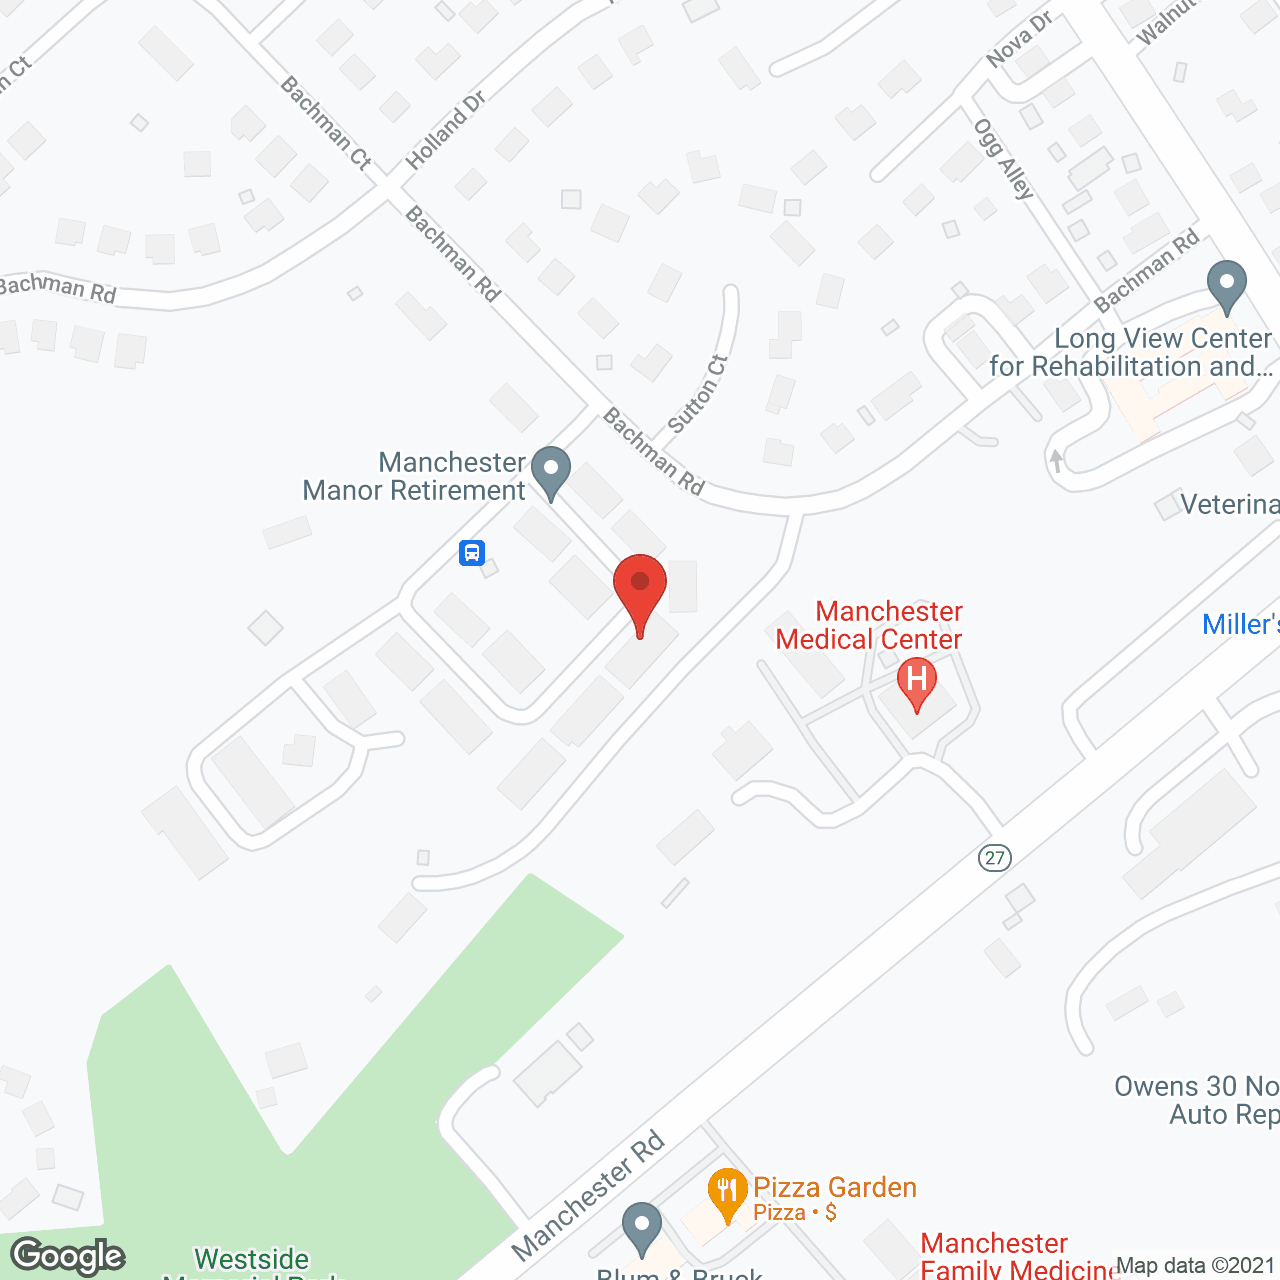 Manchester Manor Retirement Co in google map